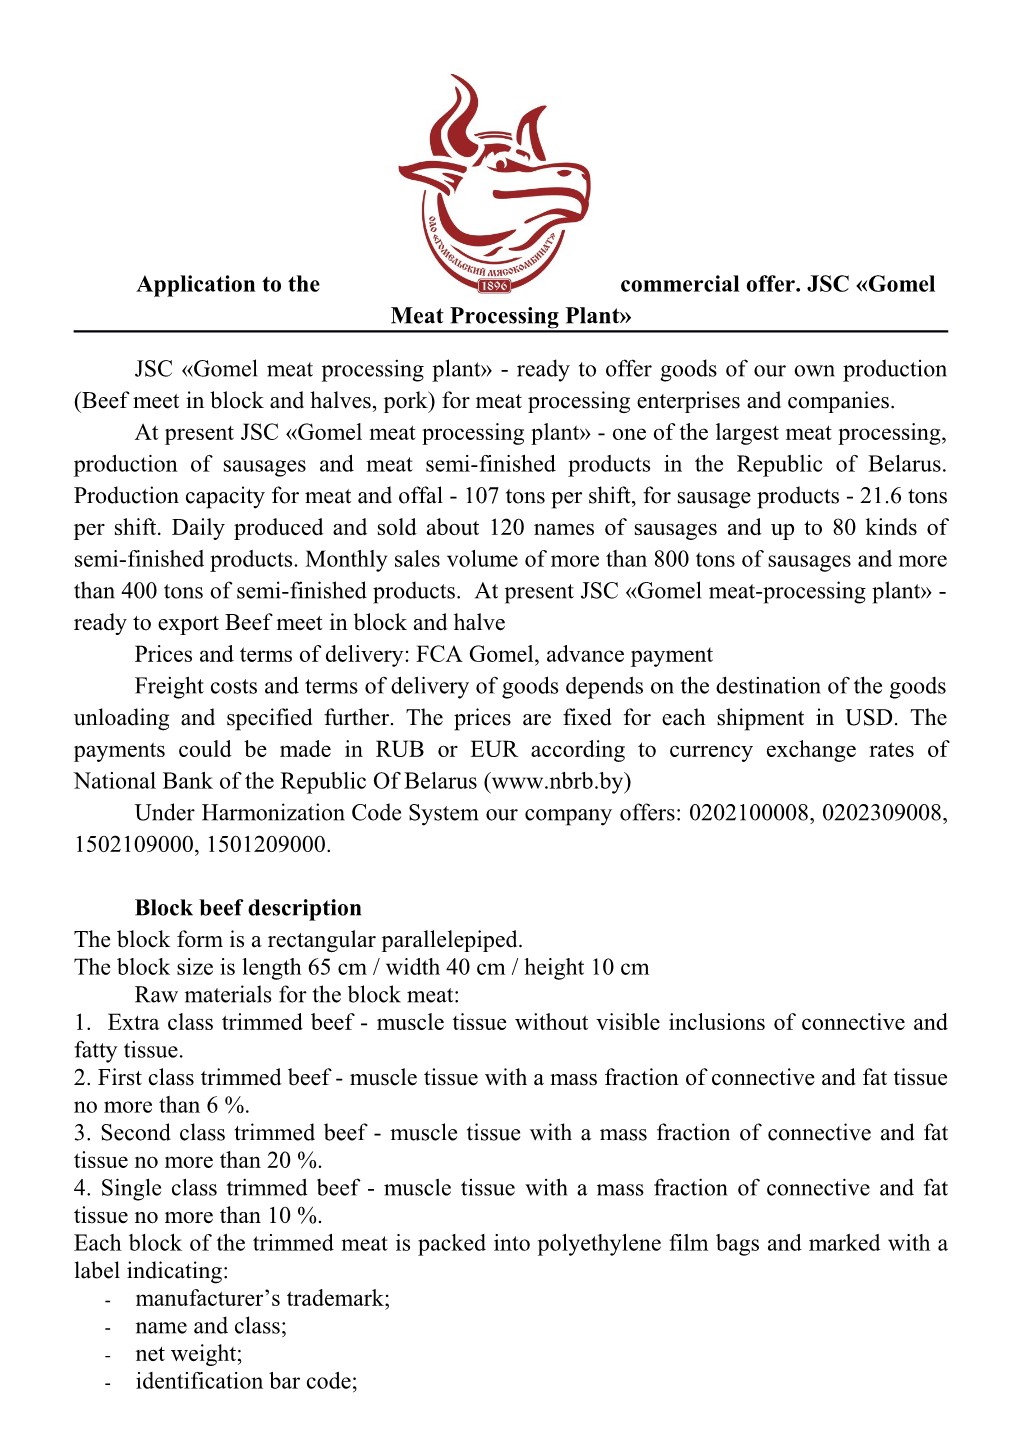 Application to the Commercial Offer.JSC Gomel Meat Processing Plant